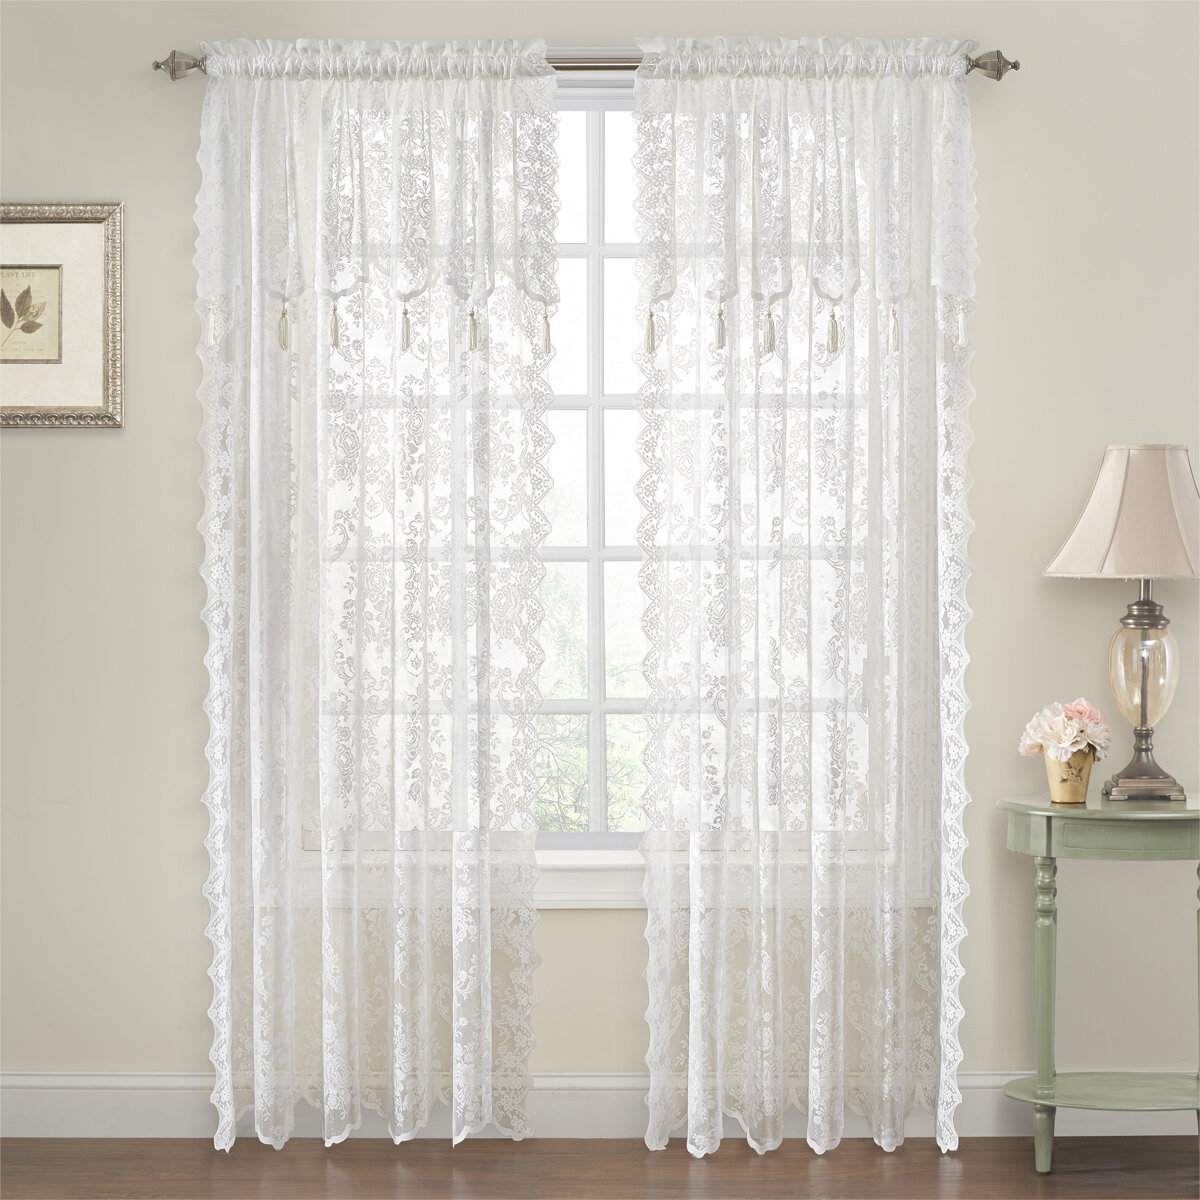 Lace Curtains You Ll Love In 2021 Wayfair